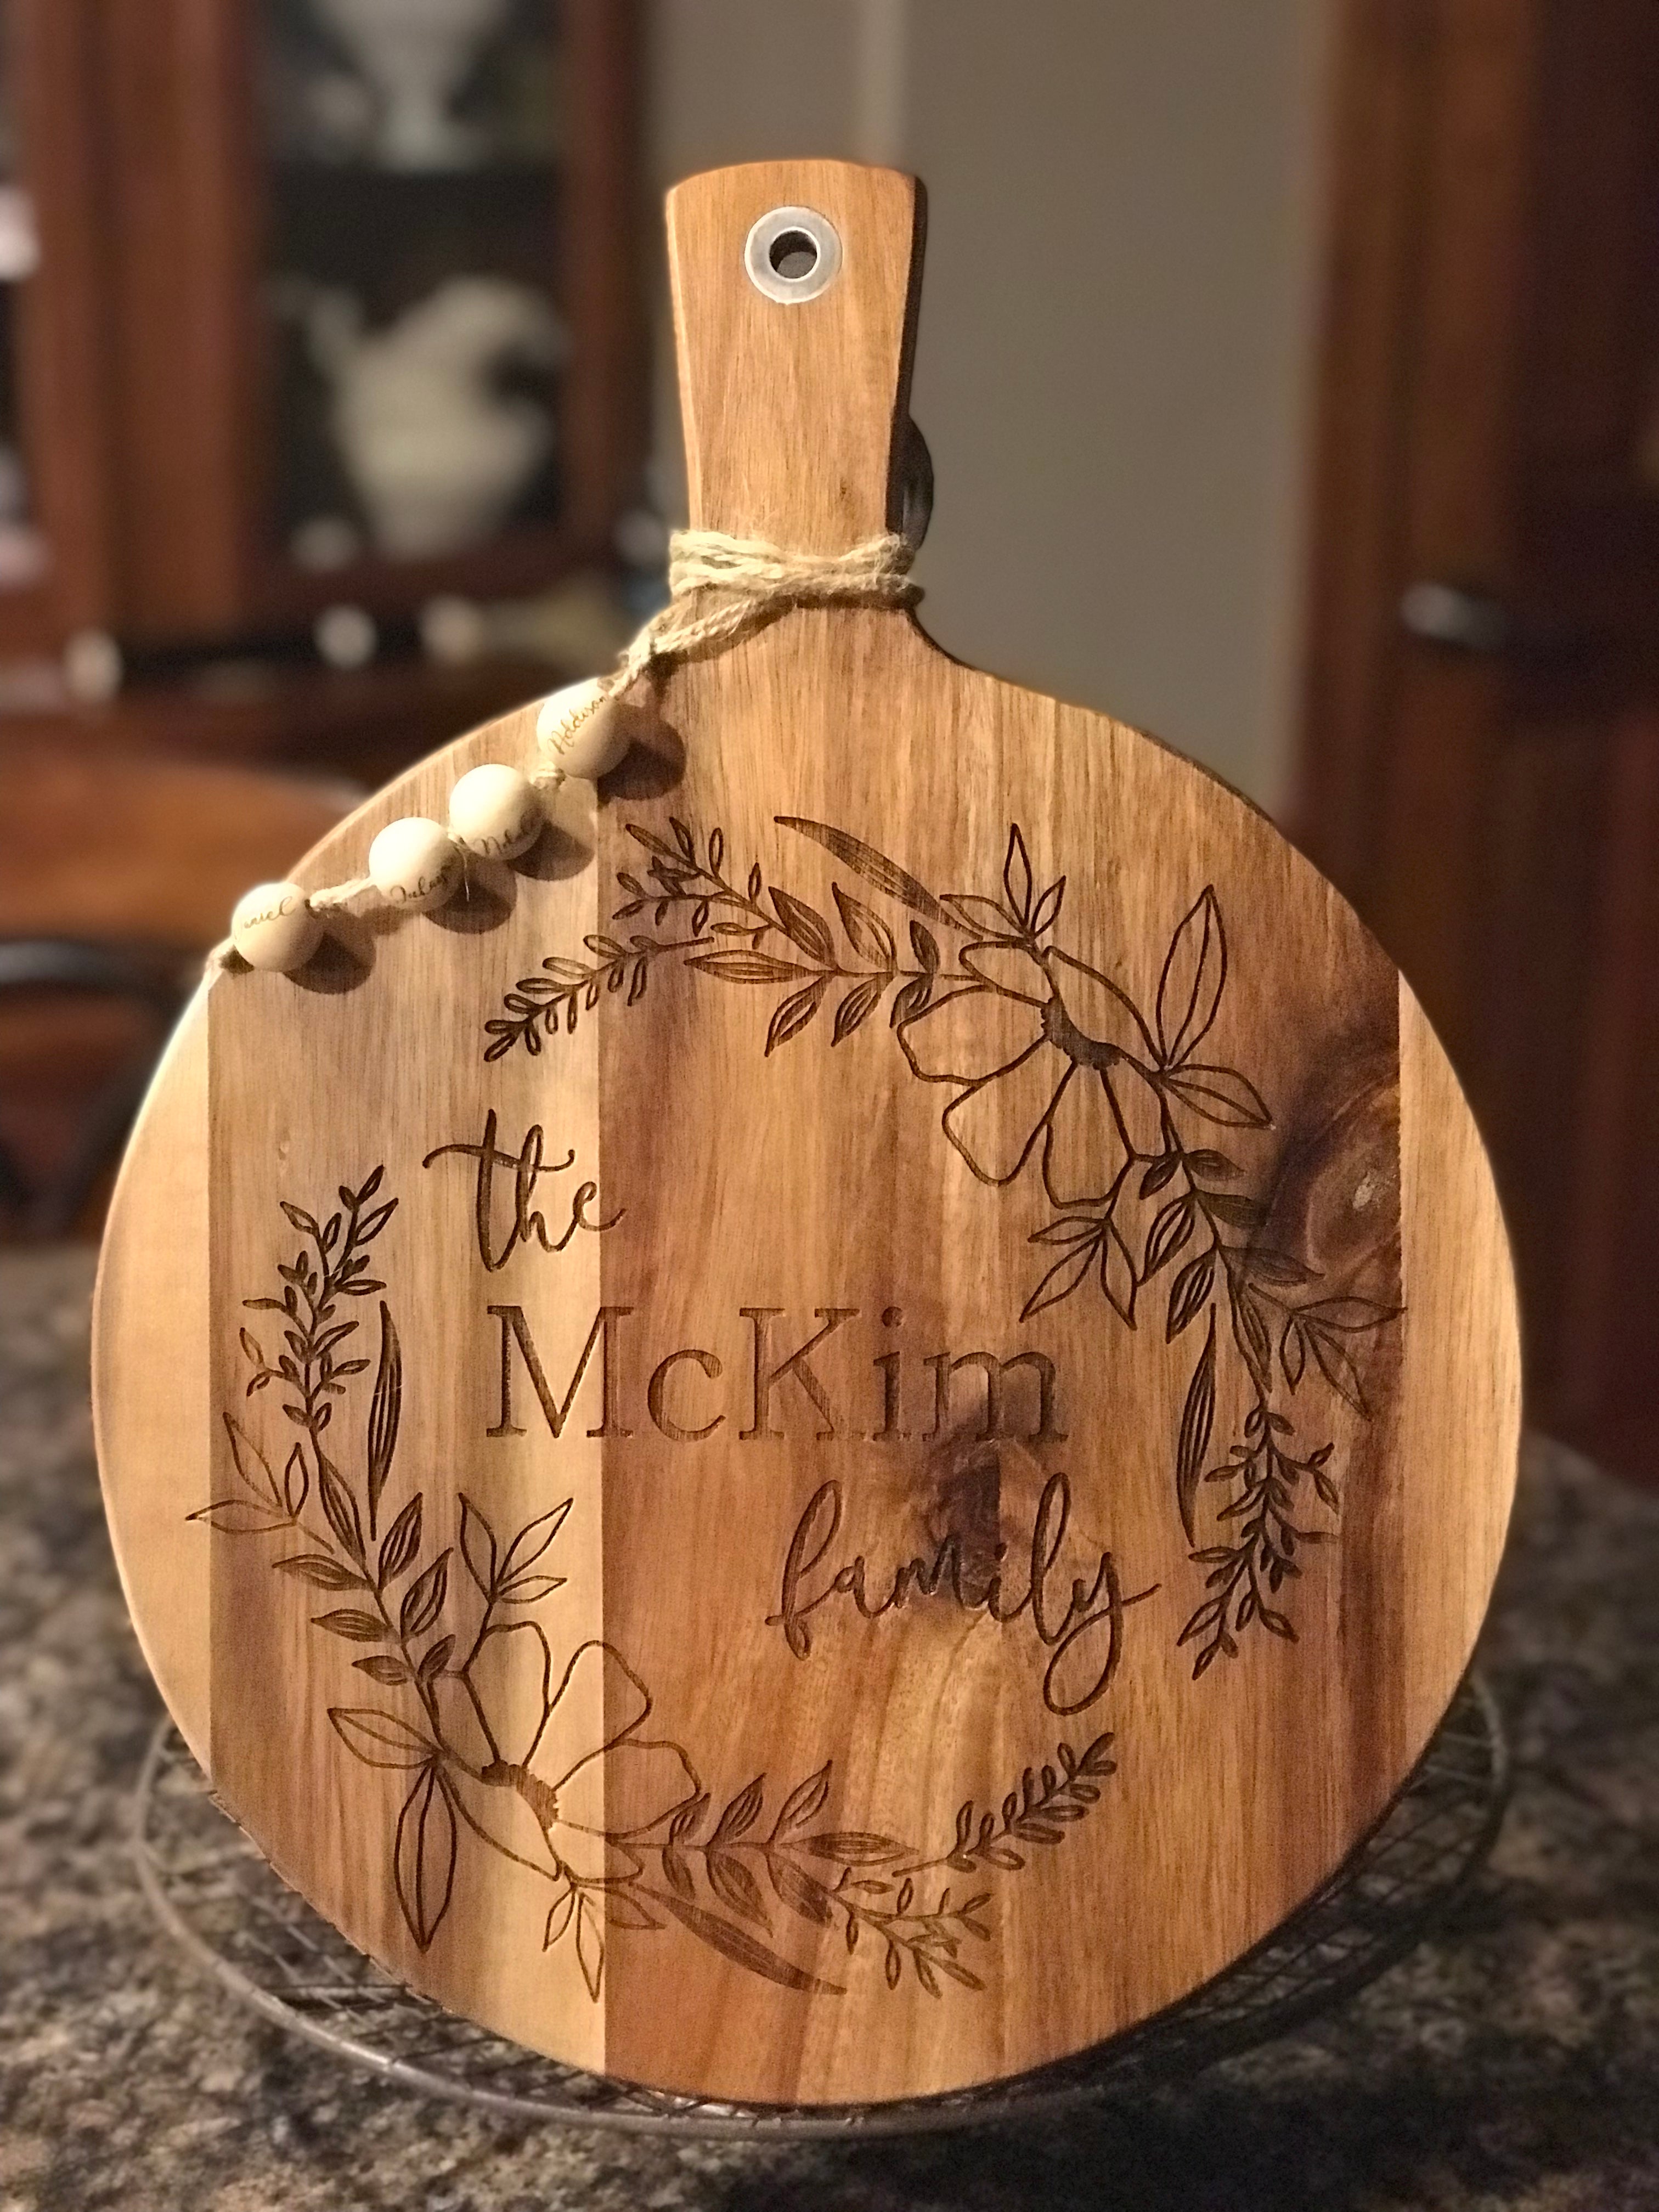 A Beautiful Personalized Laser Engraved Cutting Board with your choice of  wood type and size. Each board is designed and hand-crafted in house from  start to finish by carefully selecting each piece